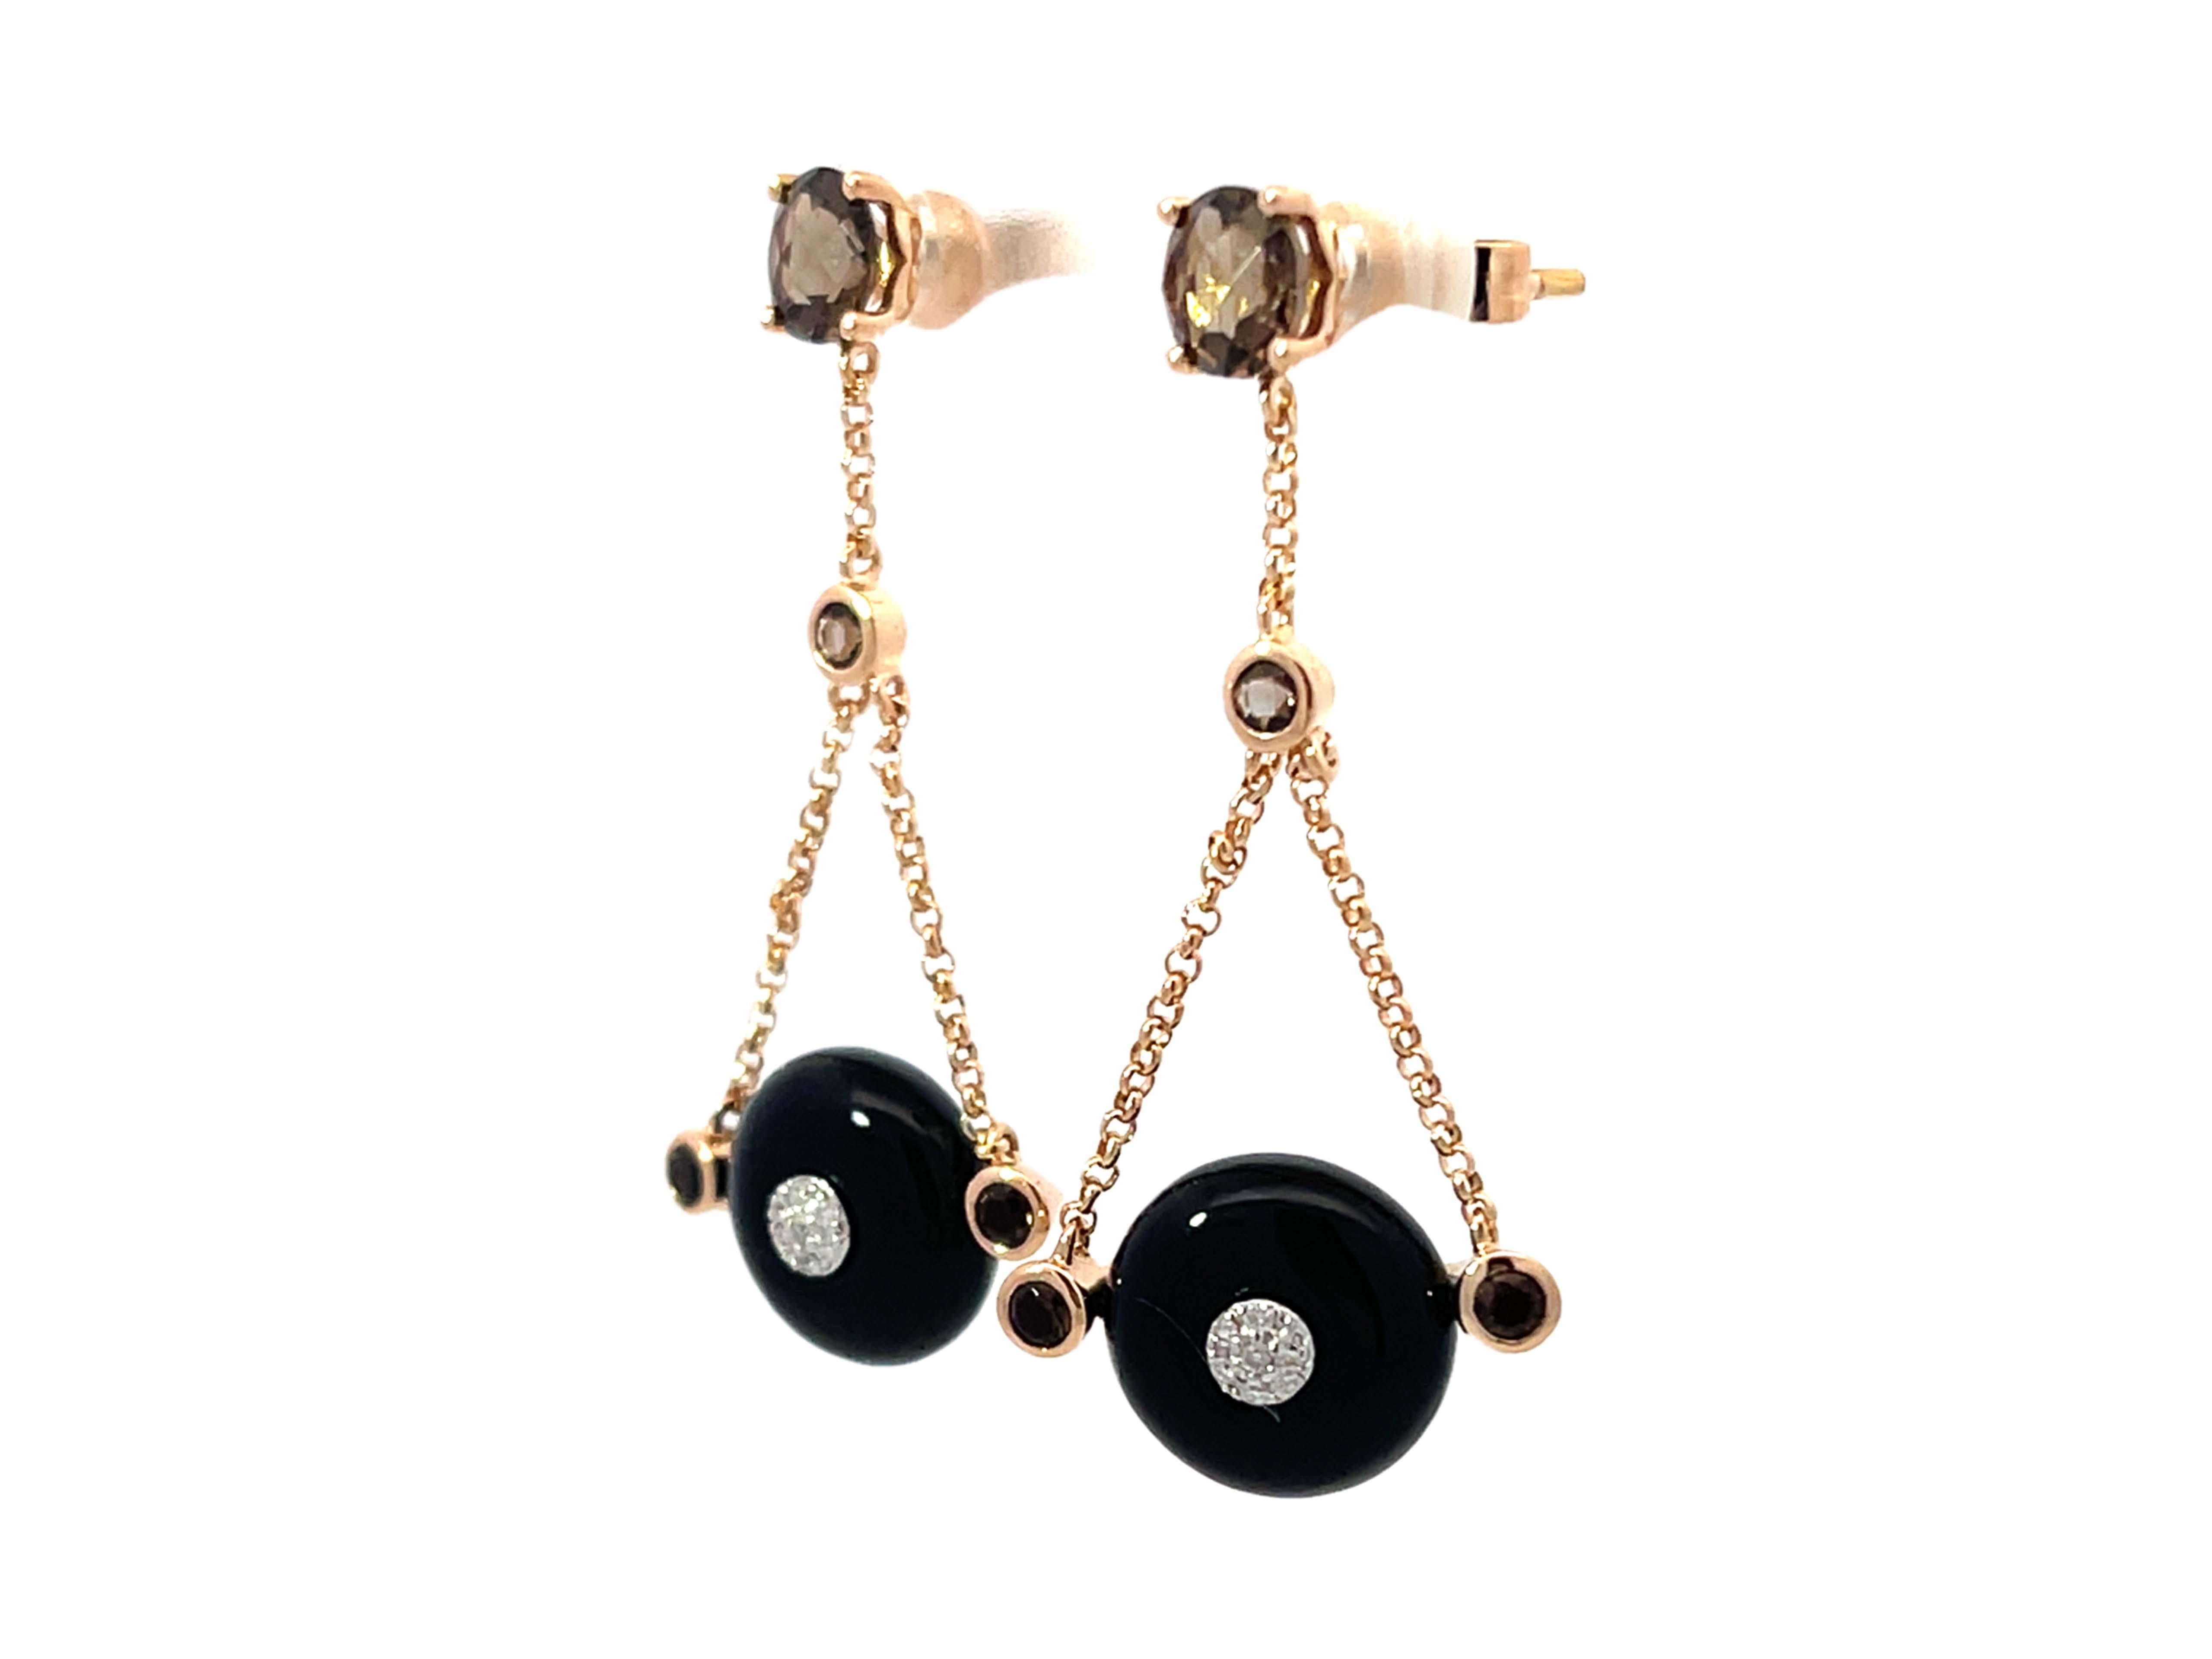 Brilliant Cut Round Black Agate Diamond and Smoky Topaz Dangly Earrings 14k Rose Gold For Sale